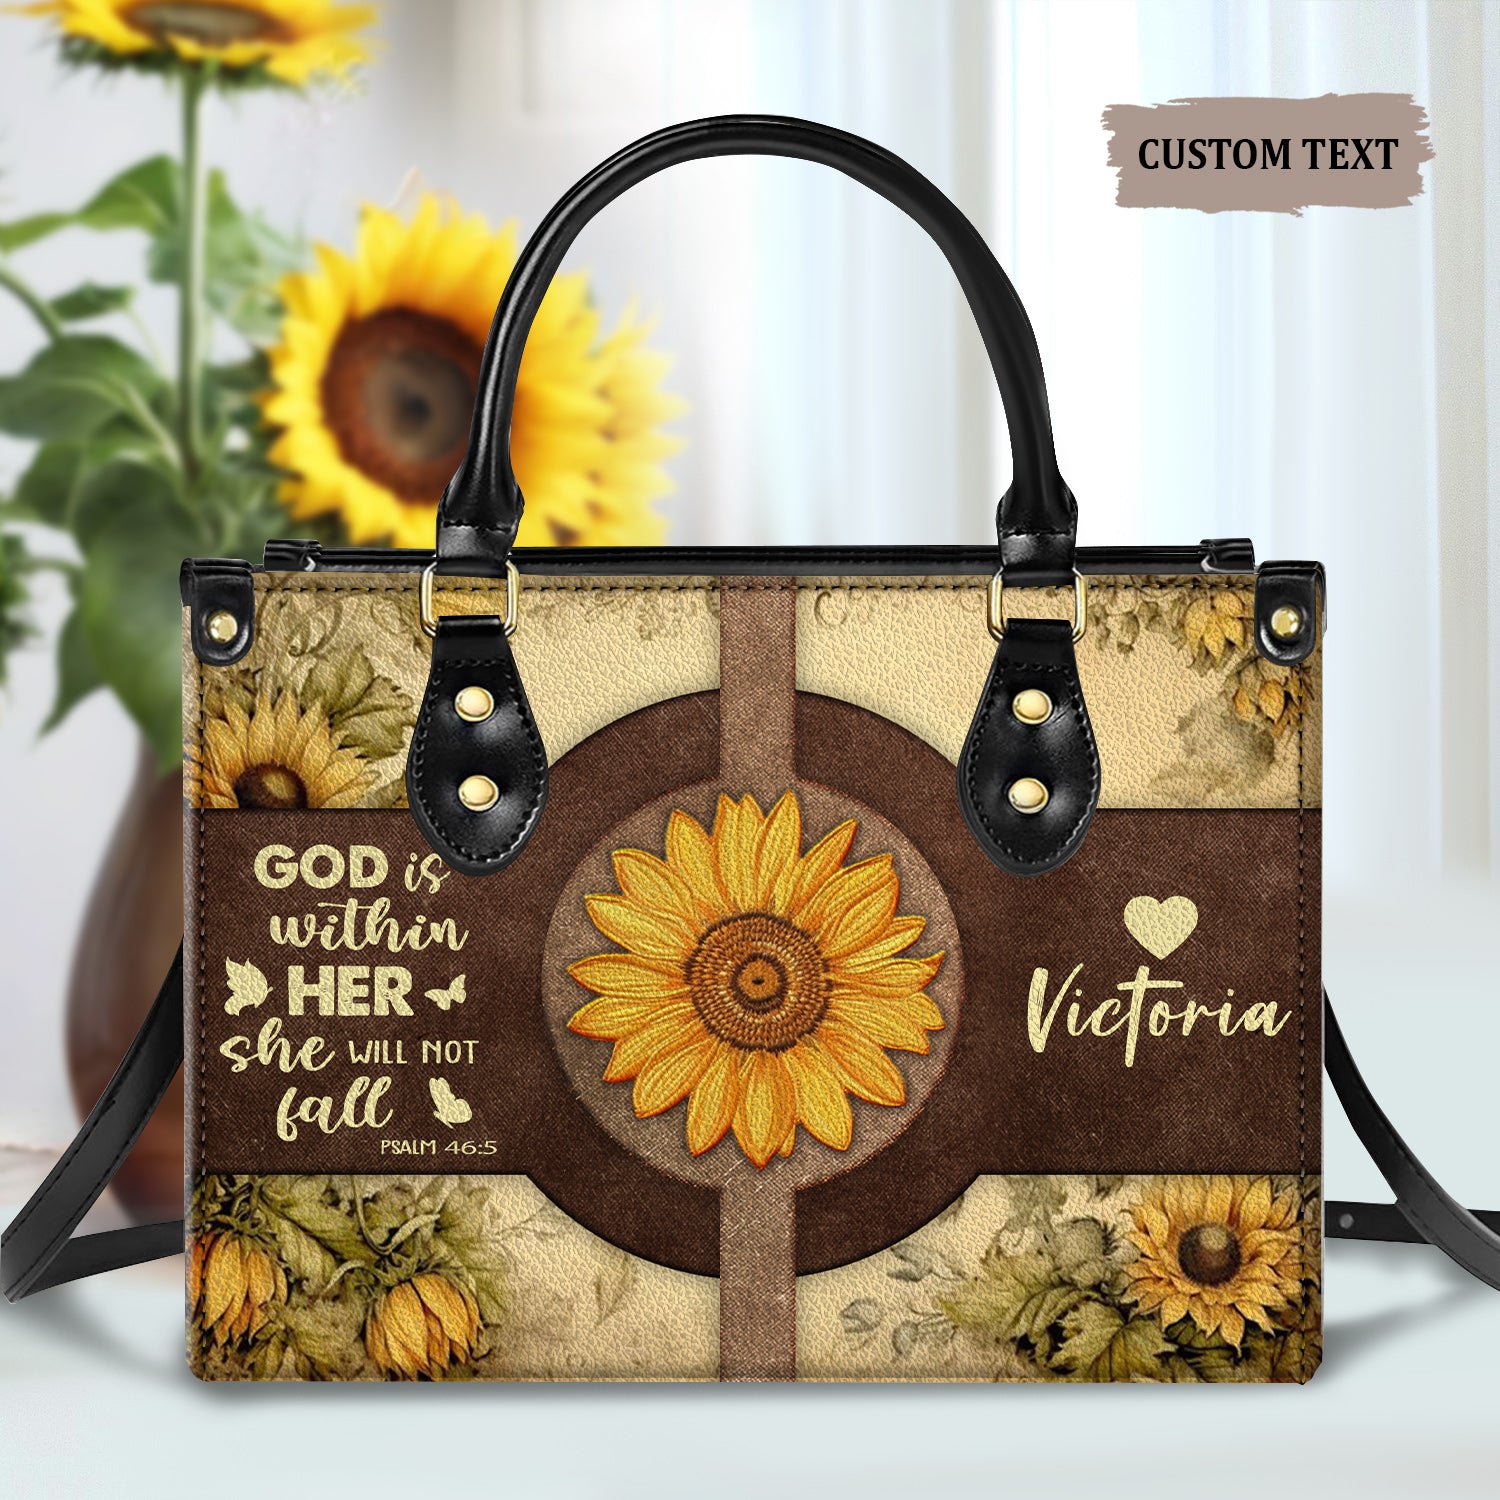 She will not fall Sunflower Style Personalized Leather Handbag